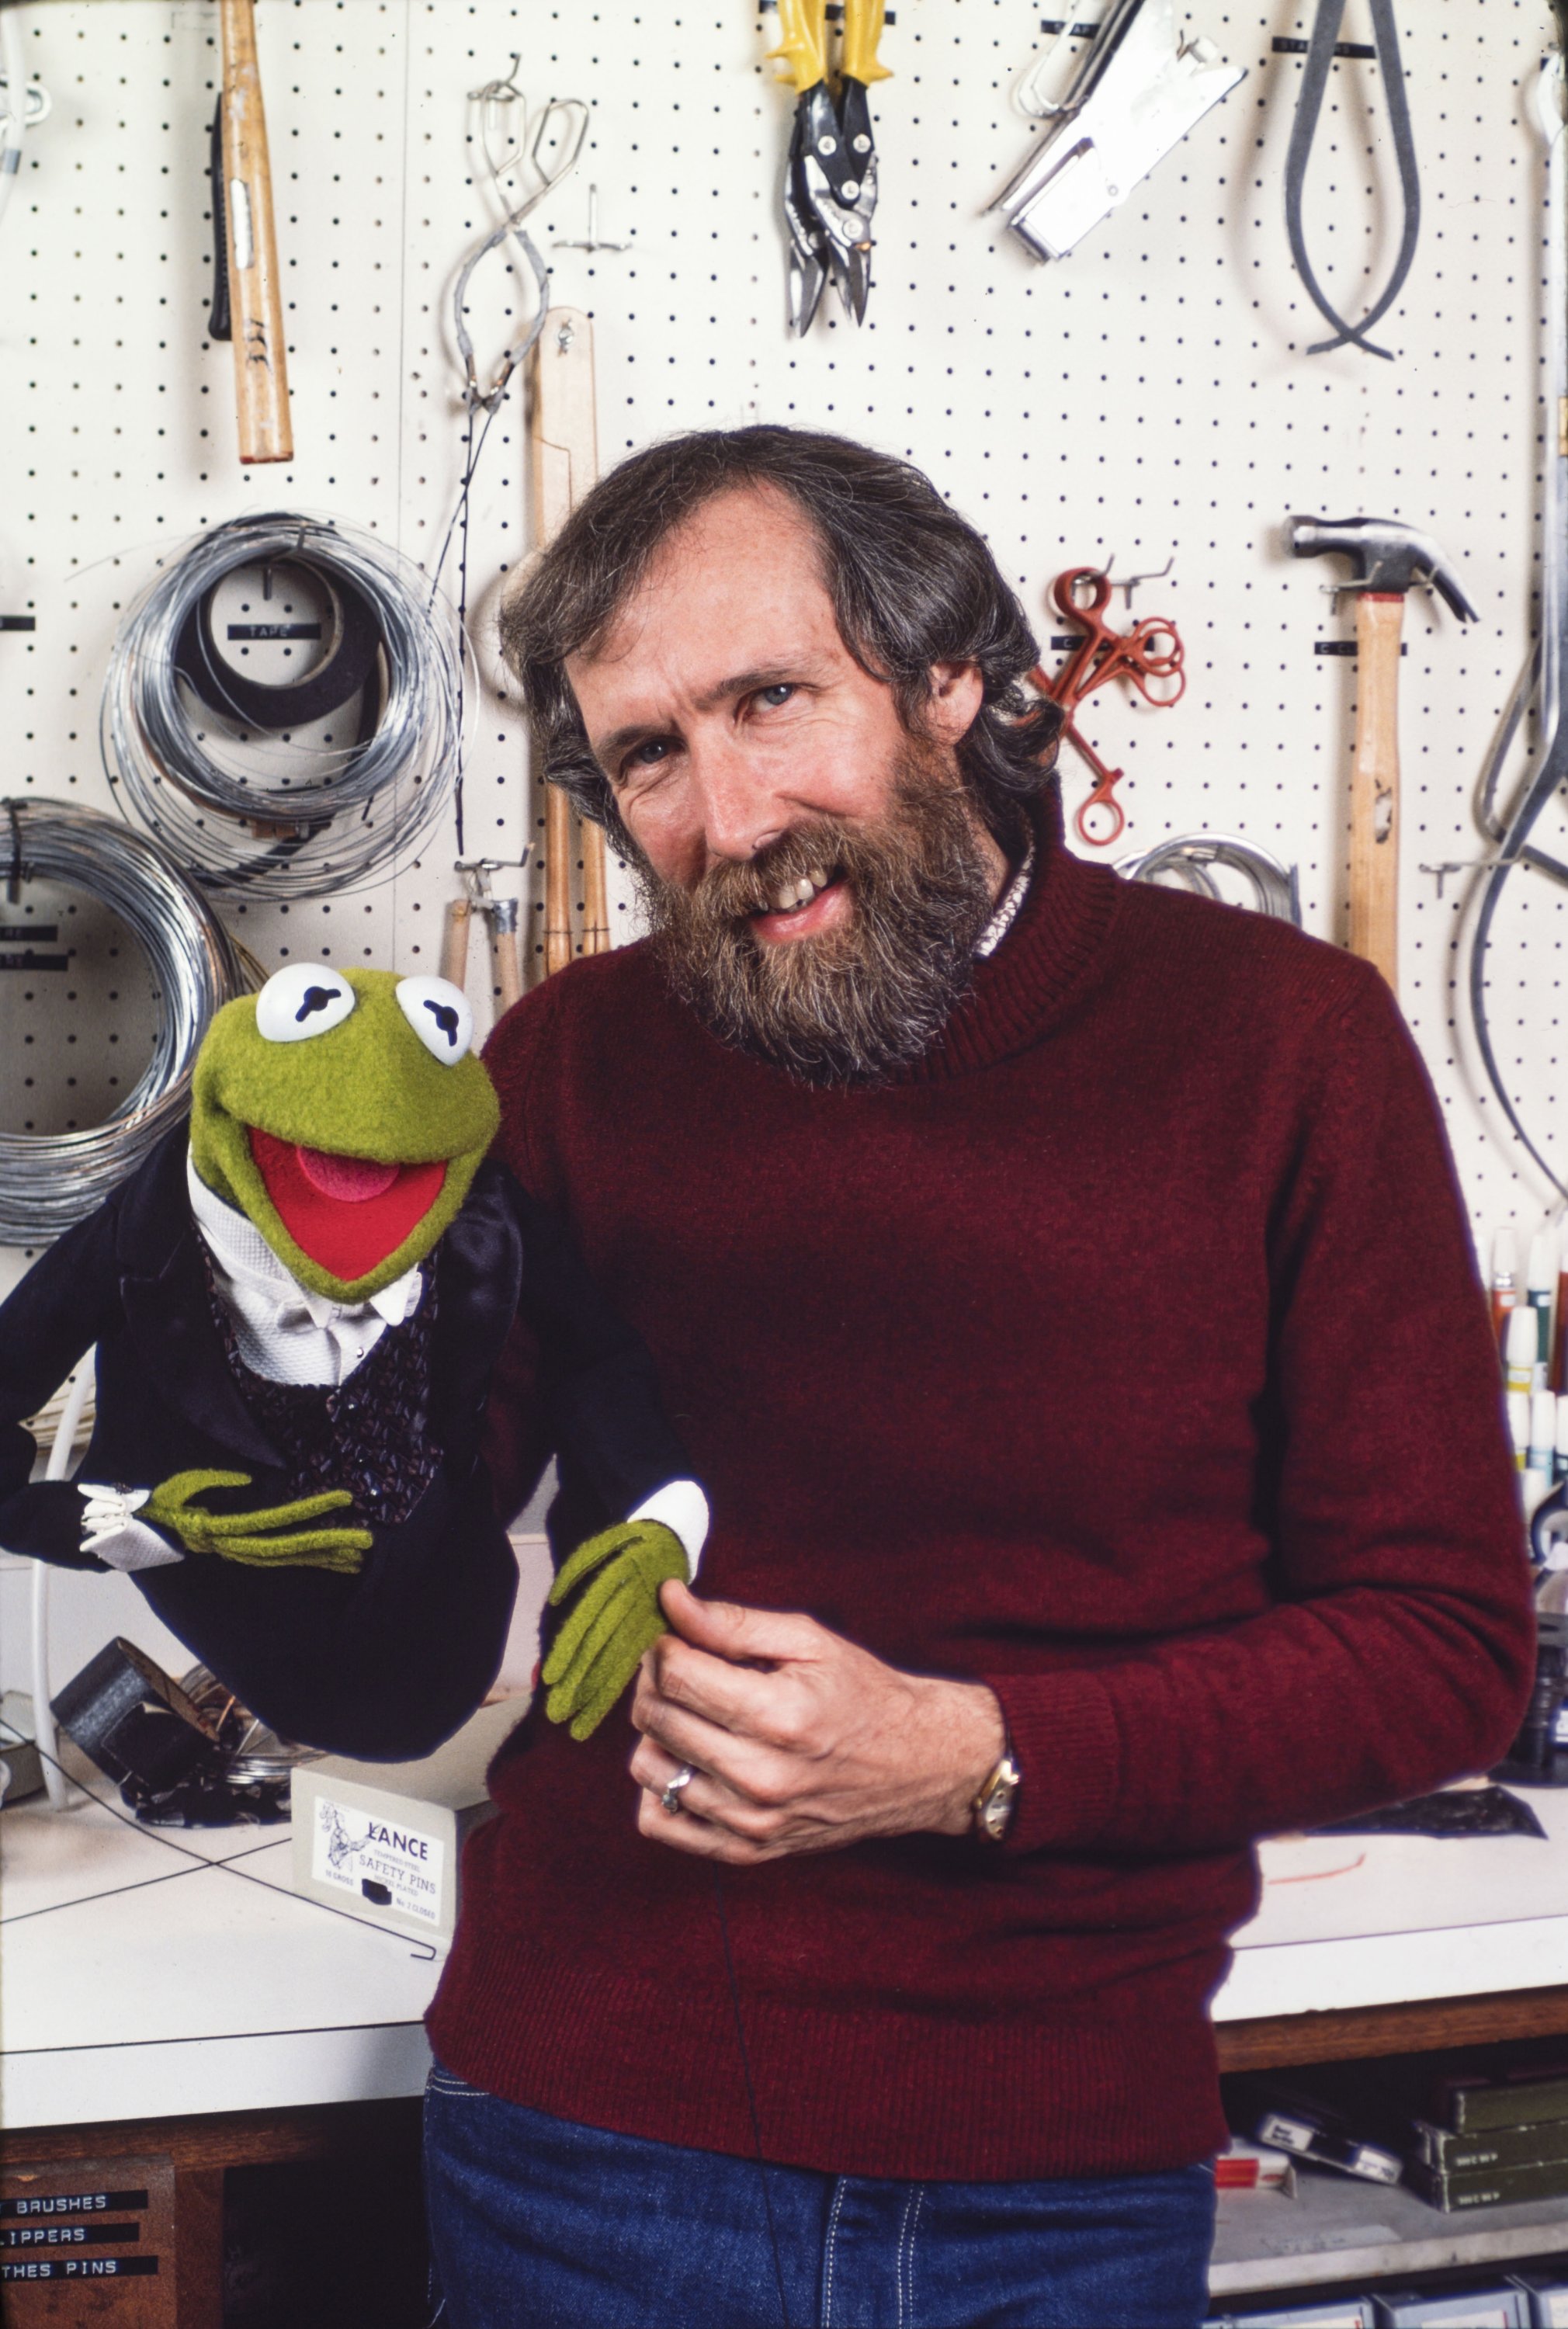 American puppeteer and filmmaker Jim Henson with one of his creations, Kermit the Frog, New York, 1983. (Getty Images)